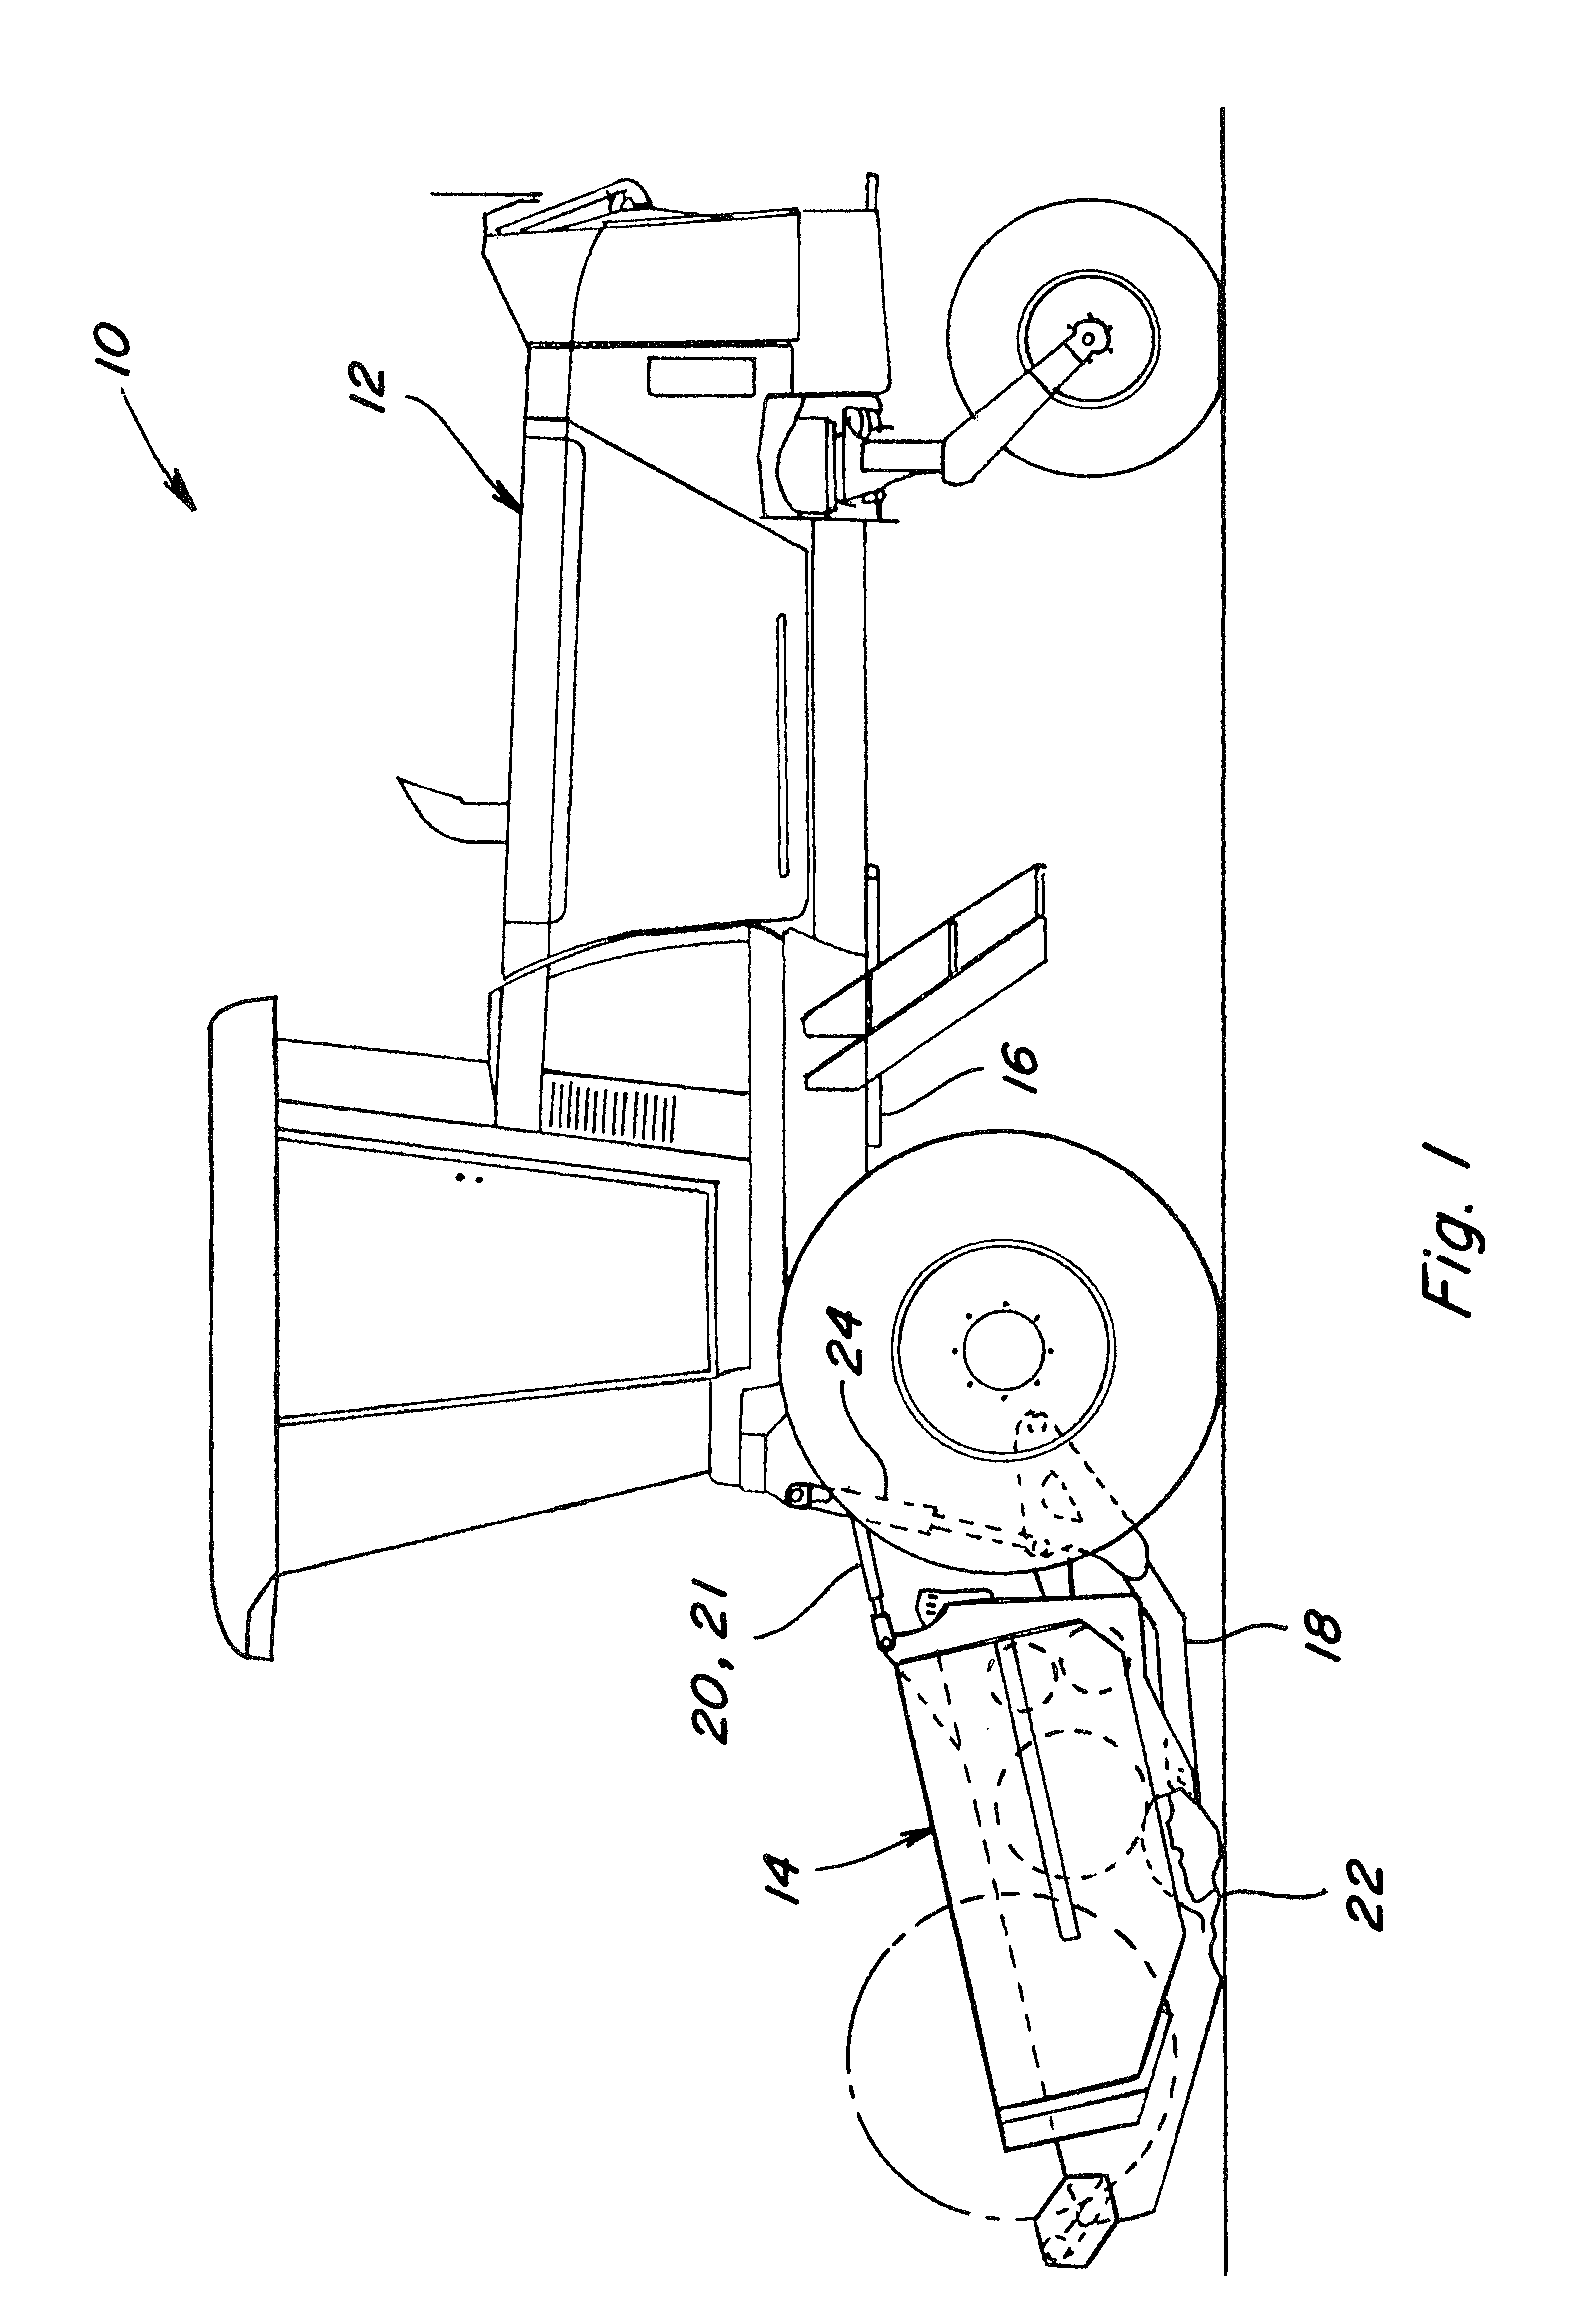 Header flotation and lift system with dual mode operation for a plant cutting machine